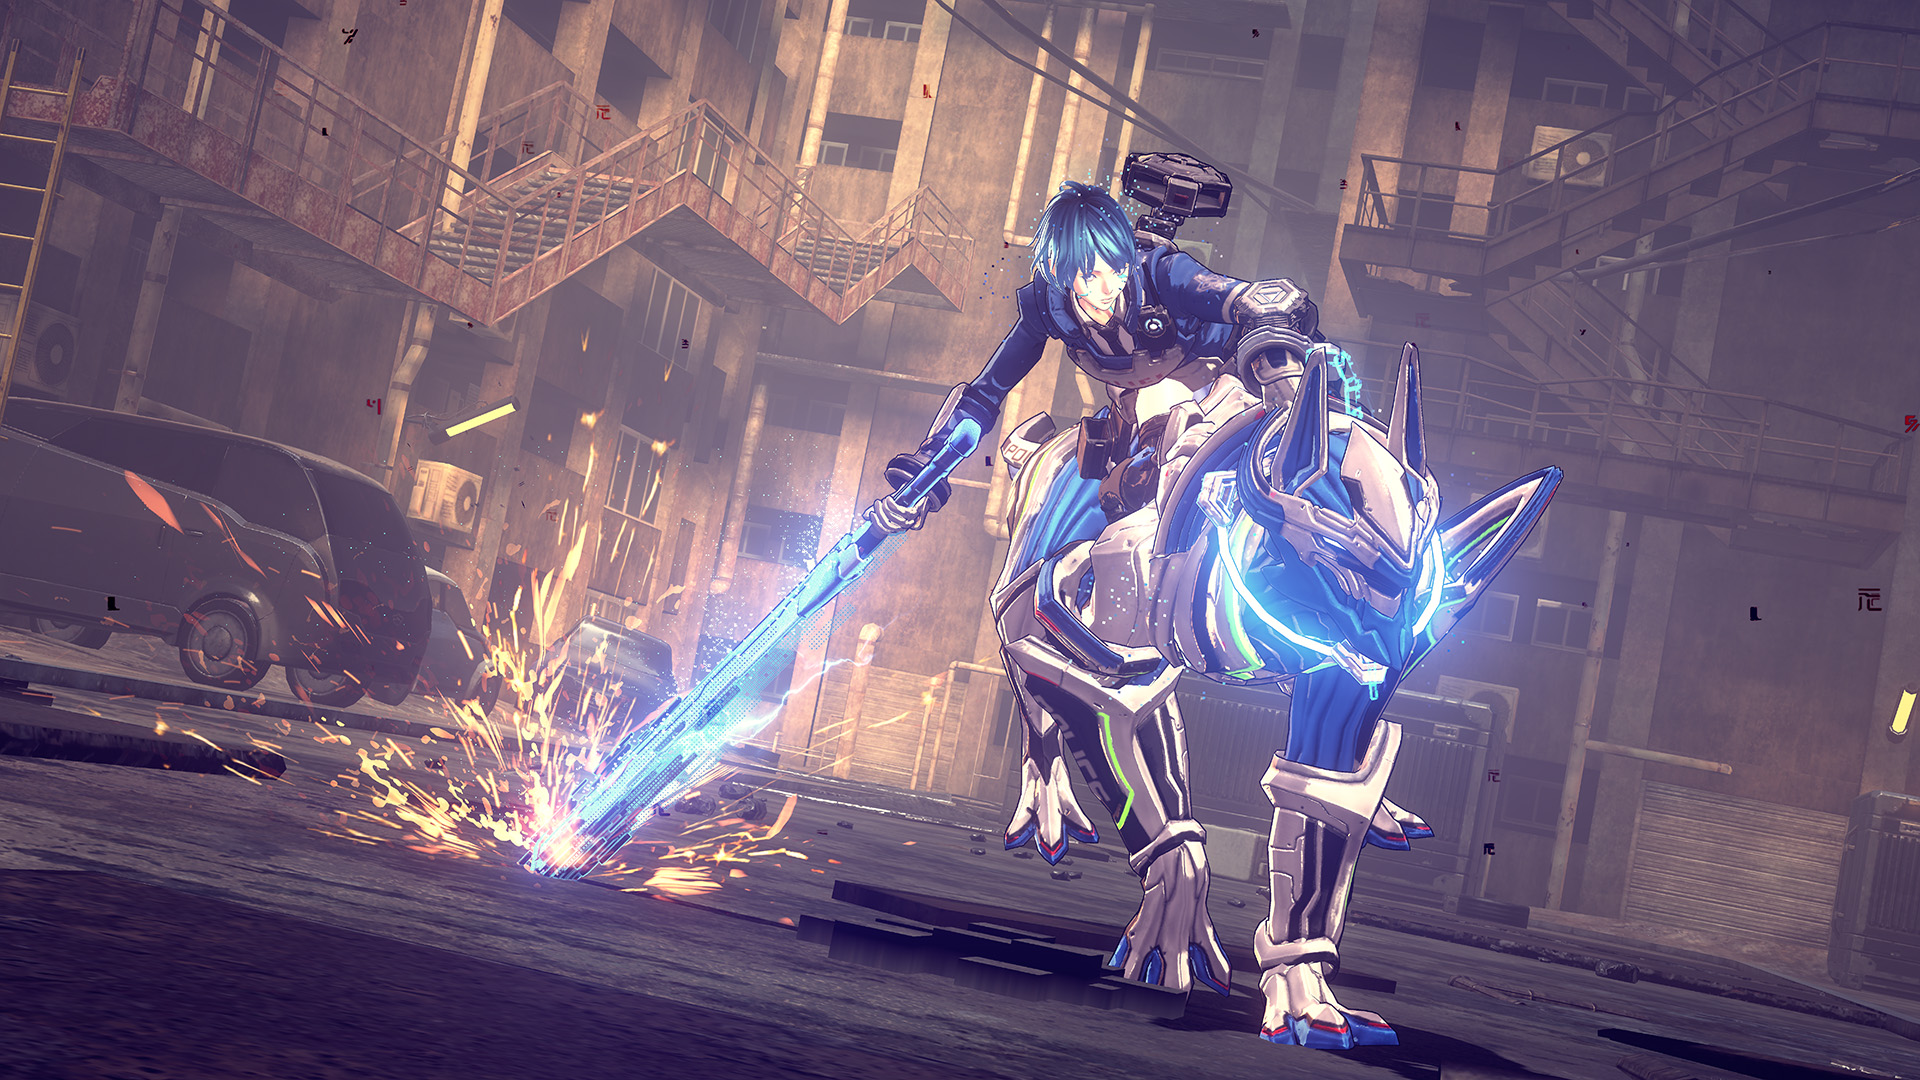 Astral Chain By Platinum Games Bayonetta Nier Automata Switch Exclusive Games Quarter To Three Forums